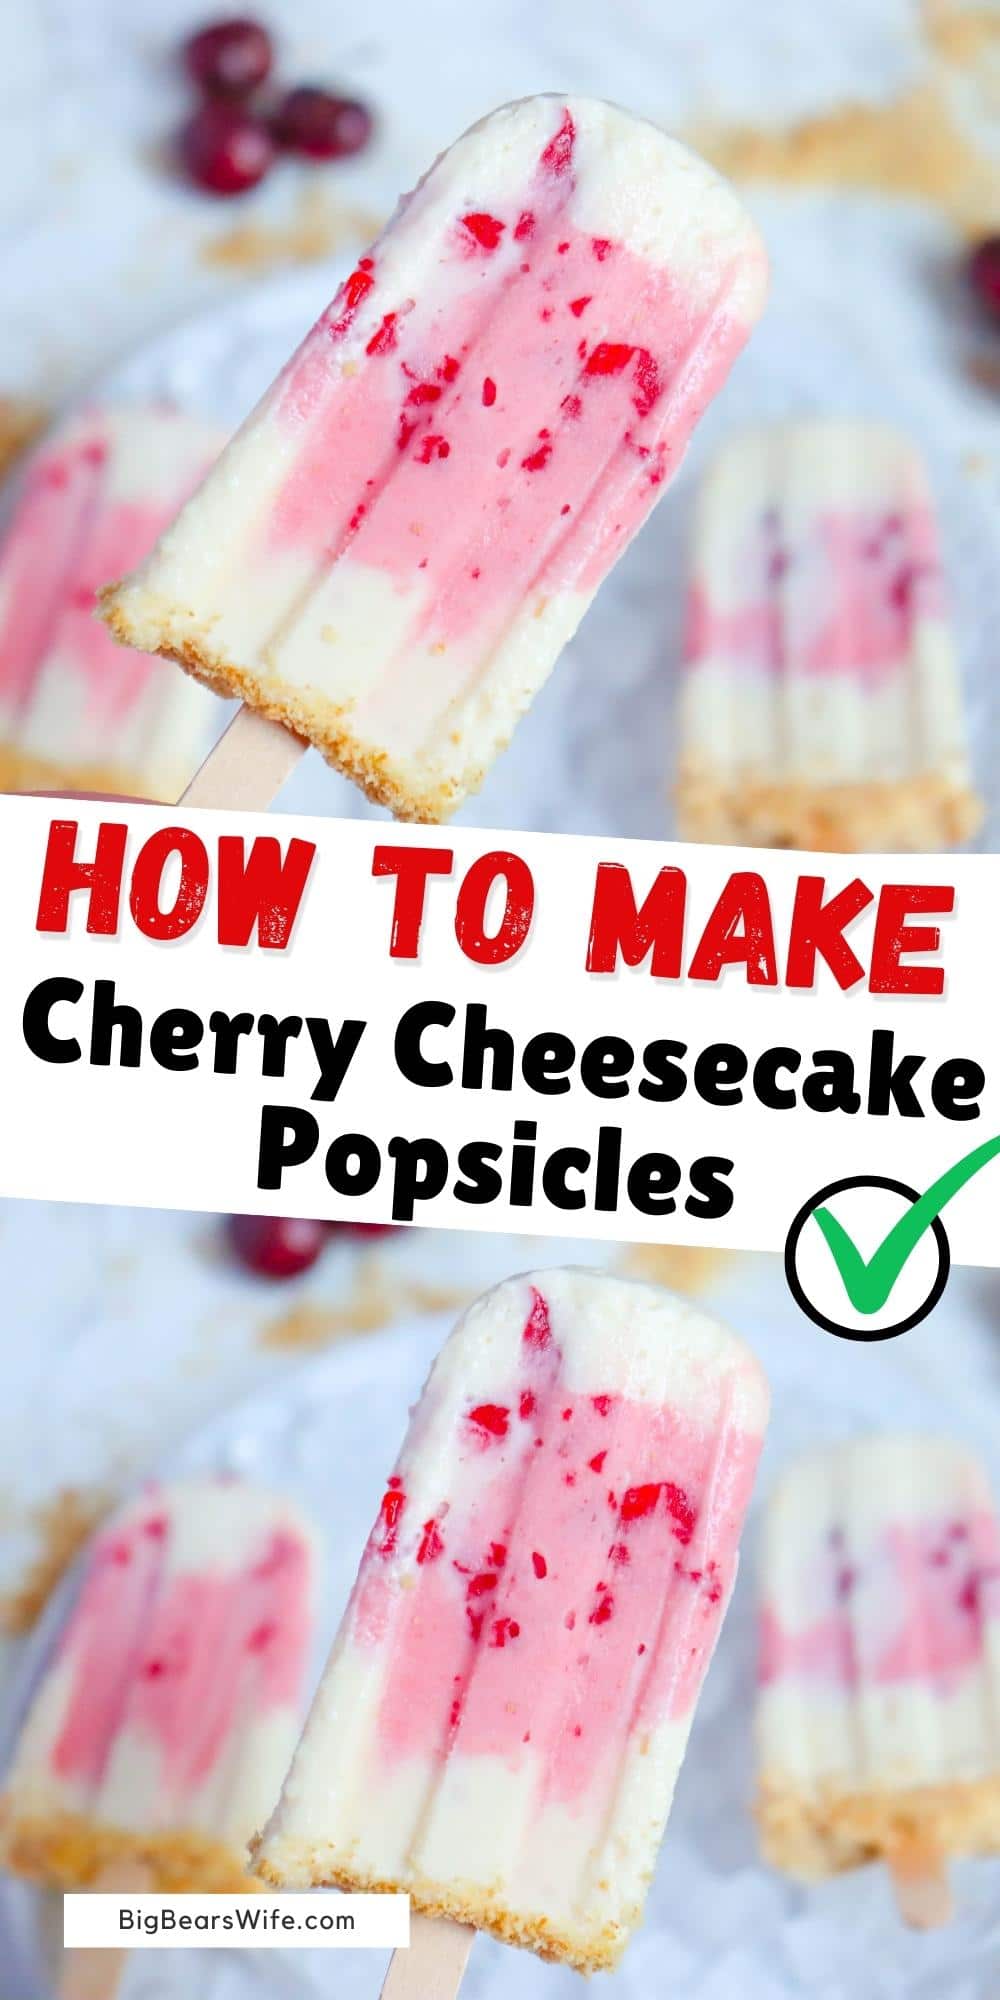 These Cherry Cheesecake Popsicles are made up of swirls of frozen cheesecake, cherry pie filling, and crushed graham crackers. Whisk them up and pop them into the freezer for the perfect summer treat! via @bigbearswife